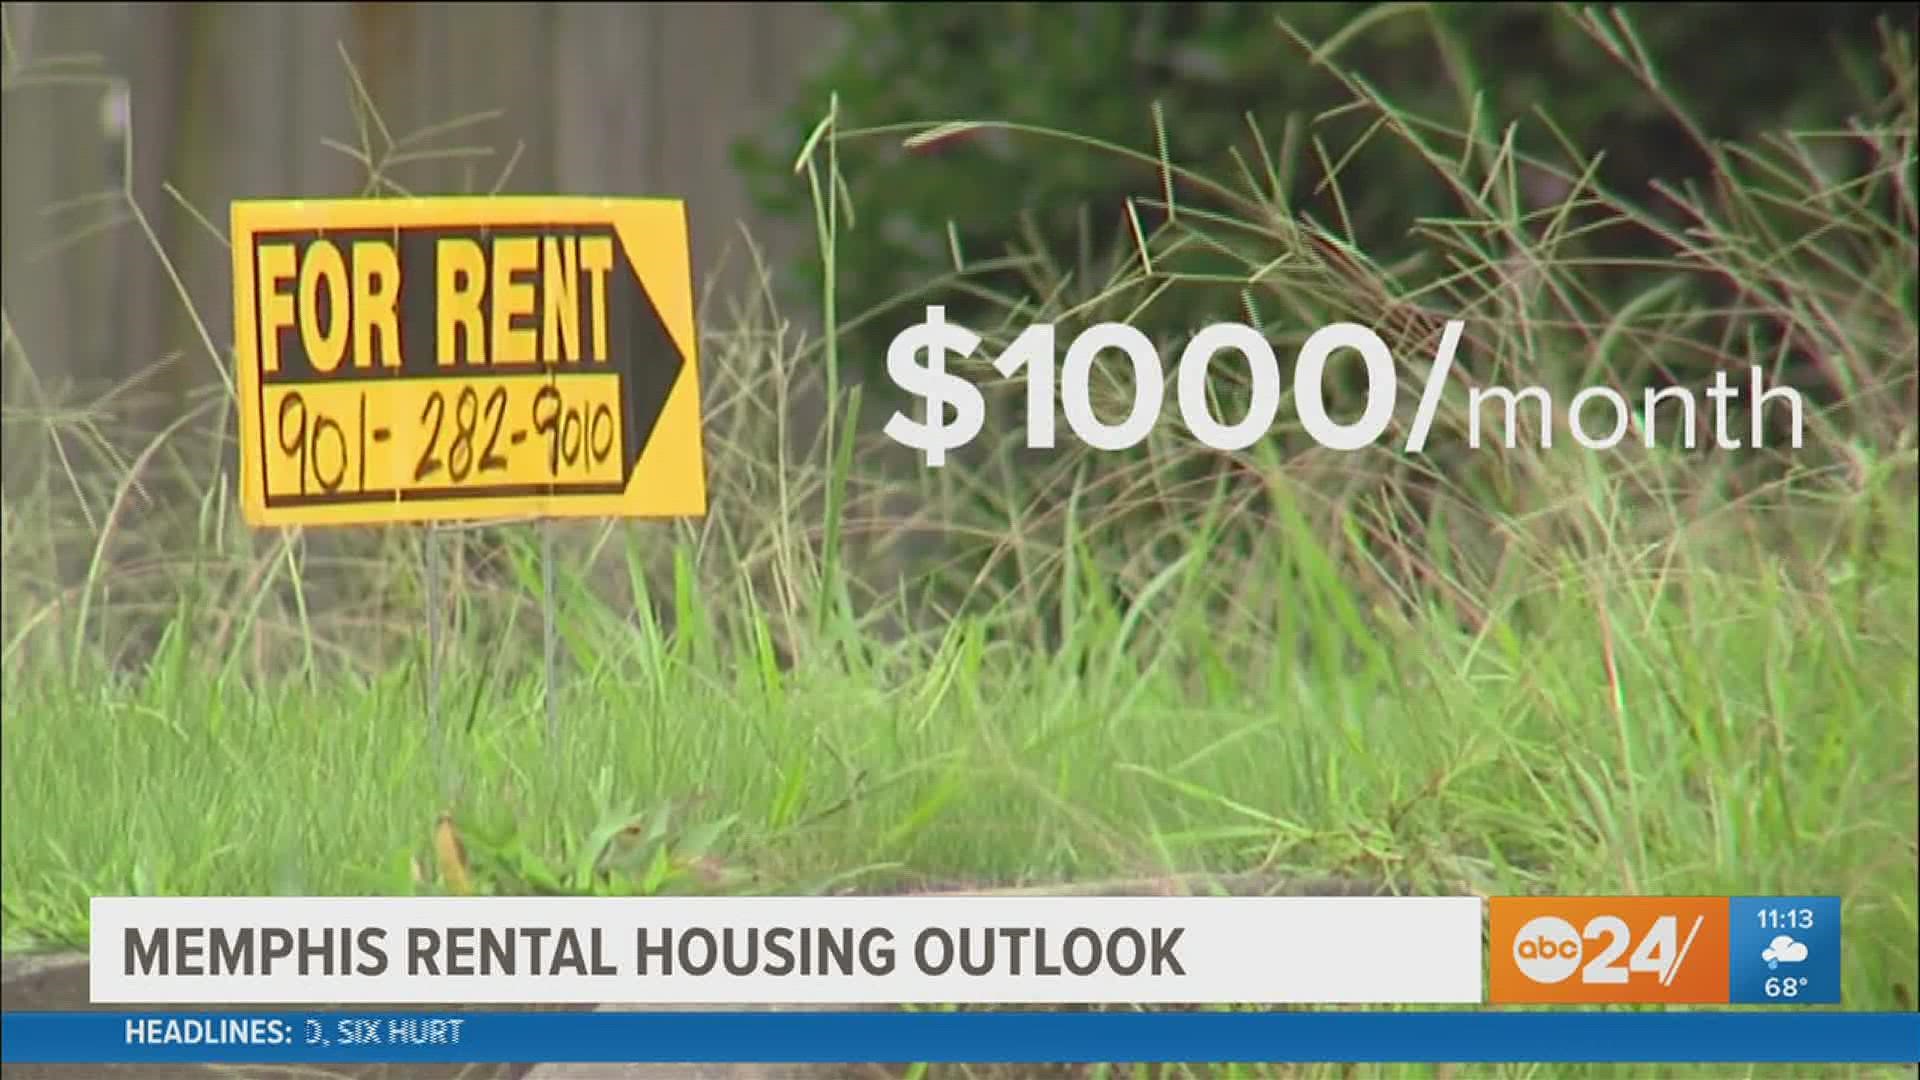 Rental prices in Memphis increased 23% year to year in June 2021